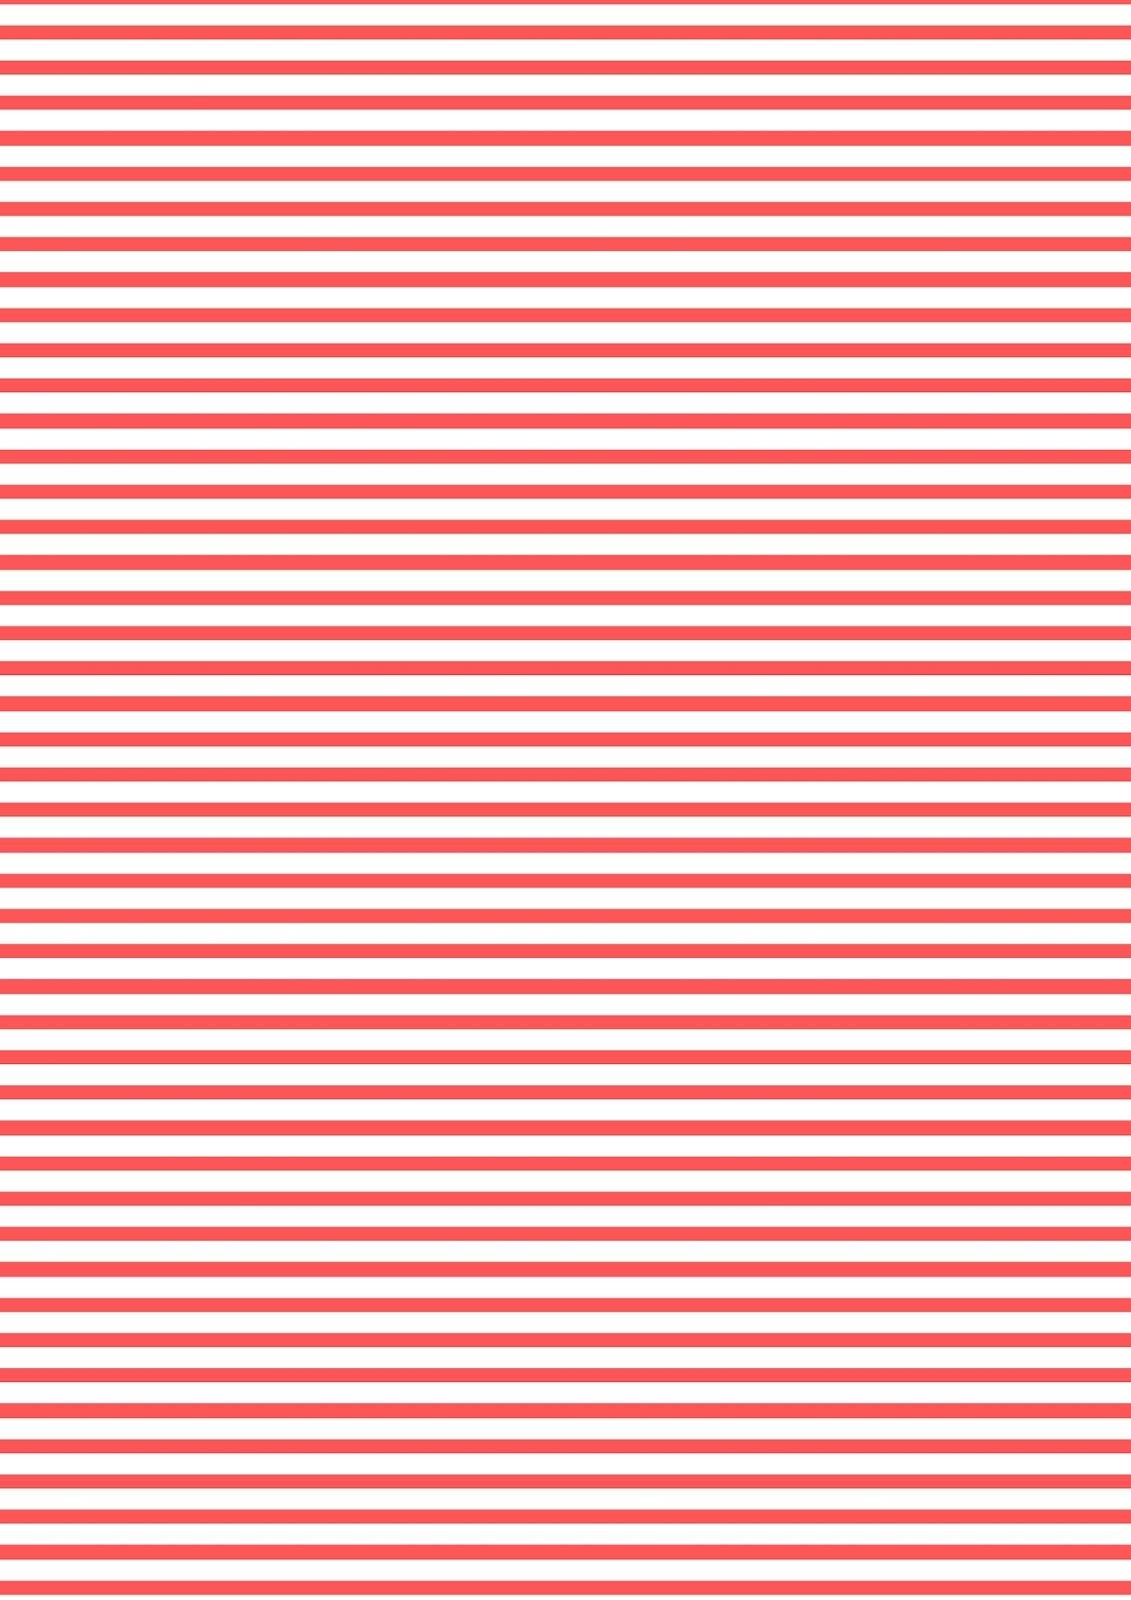 Free Printable Stars And Stripes Pattern Papers - Ausdruckbares - Free Printable Wallpaper Patterns